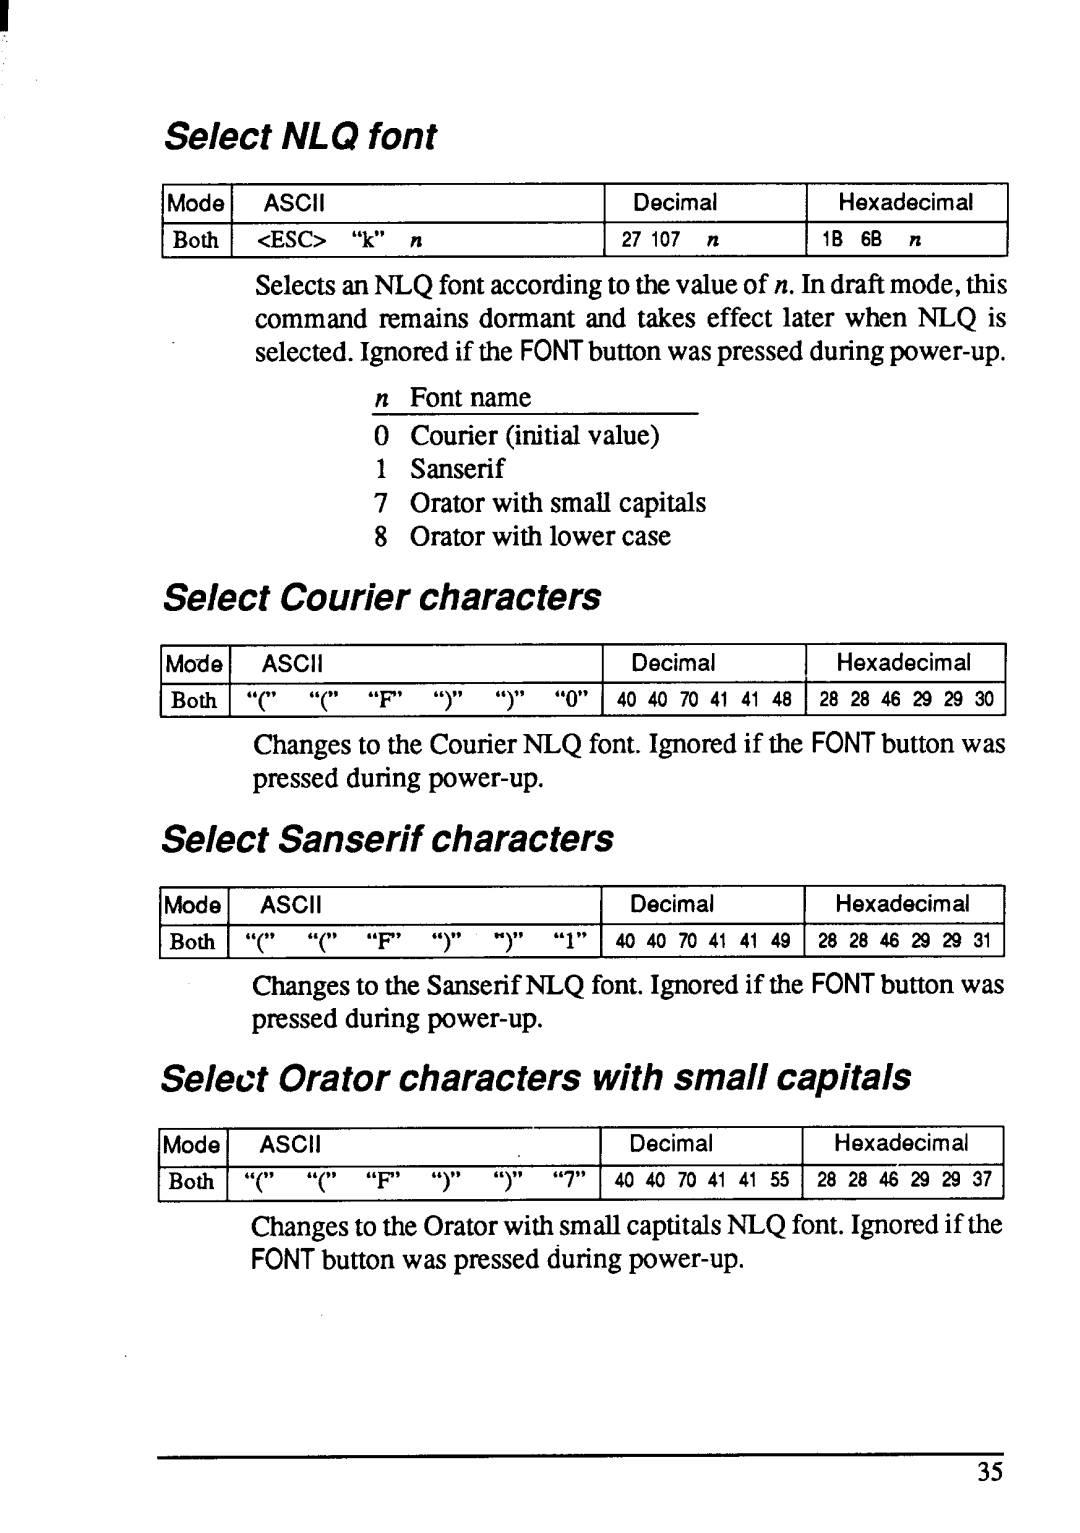 Star Micronics NX-1001 manual Select NLC?font, Select Couriercharacters, Select Sanserifcharacters 